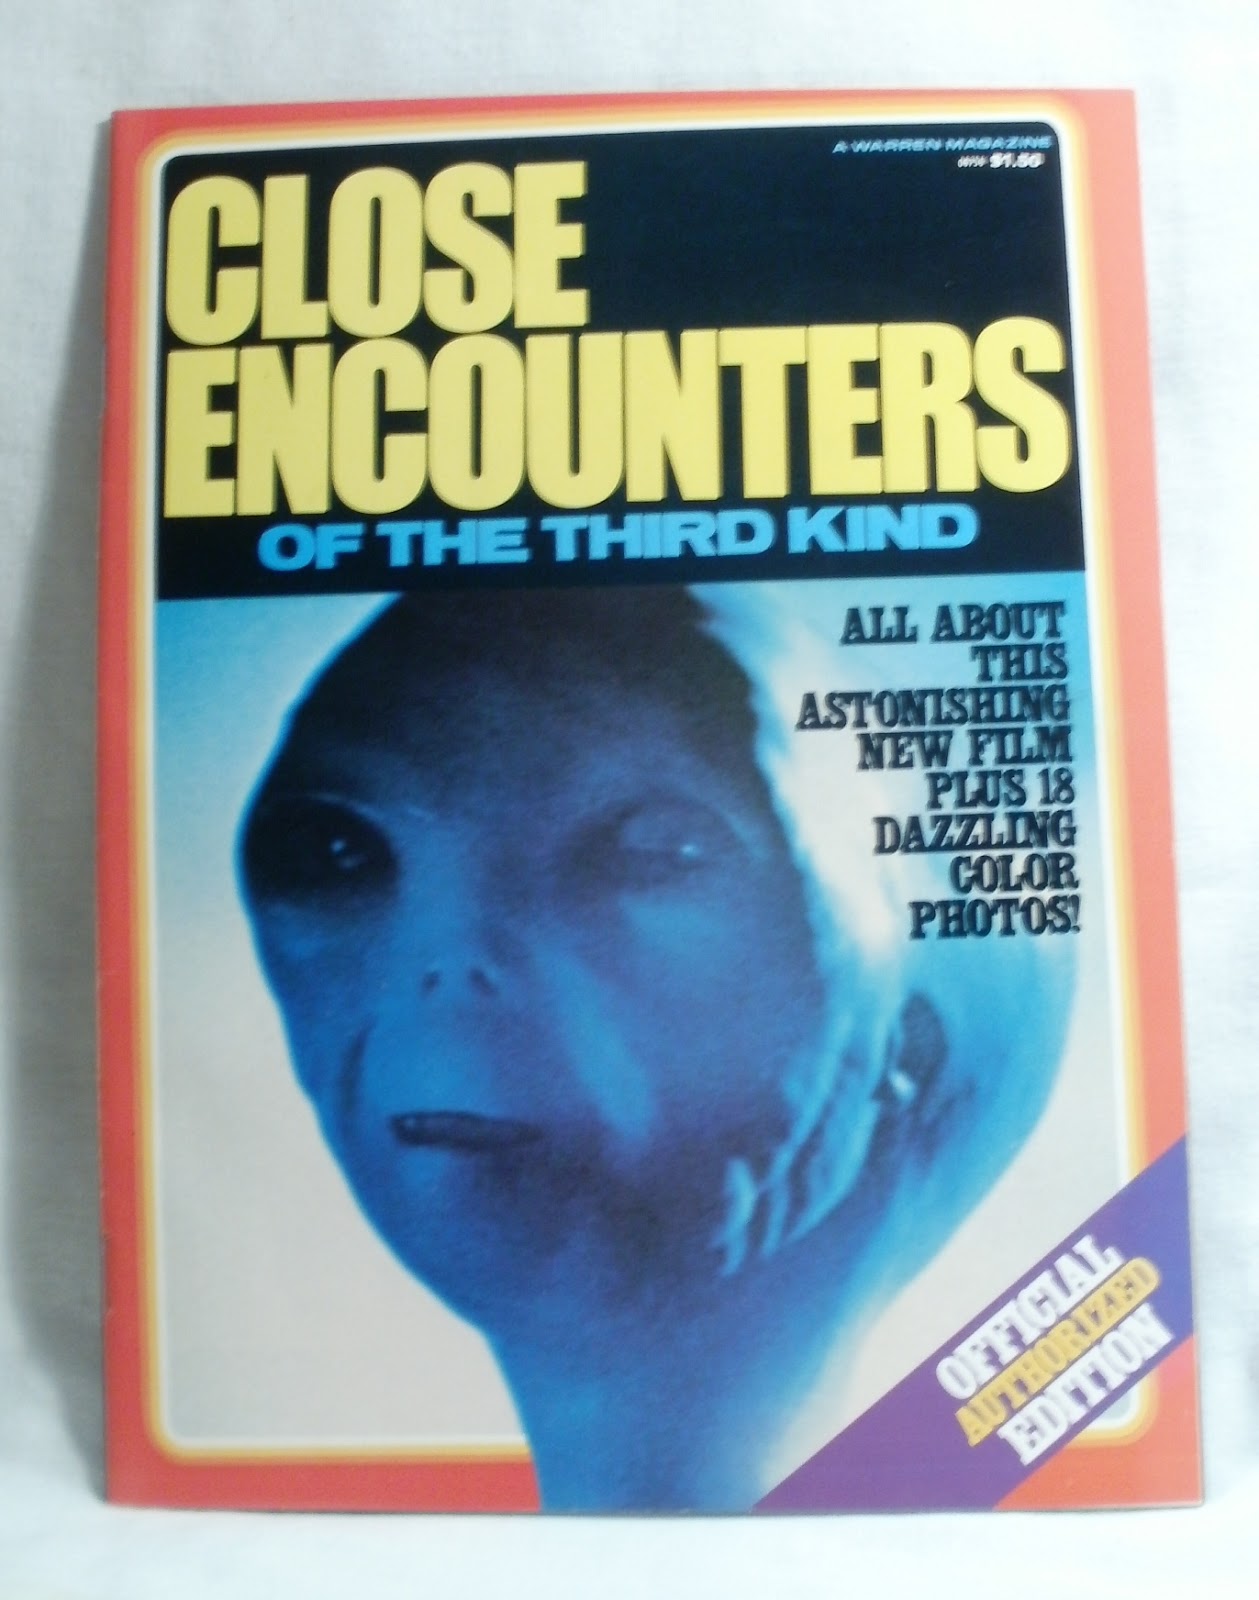 Ye Olde Rusty Walrus Shoppe Vintage 1977 Quot Close Encounters Of The Third Kind Quot Wonderland